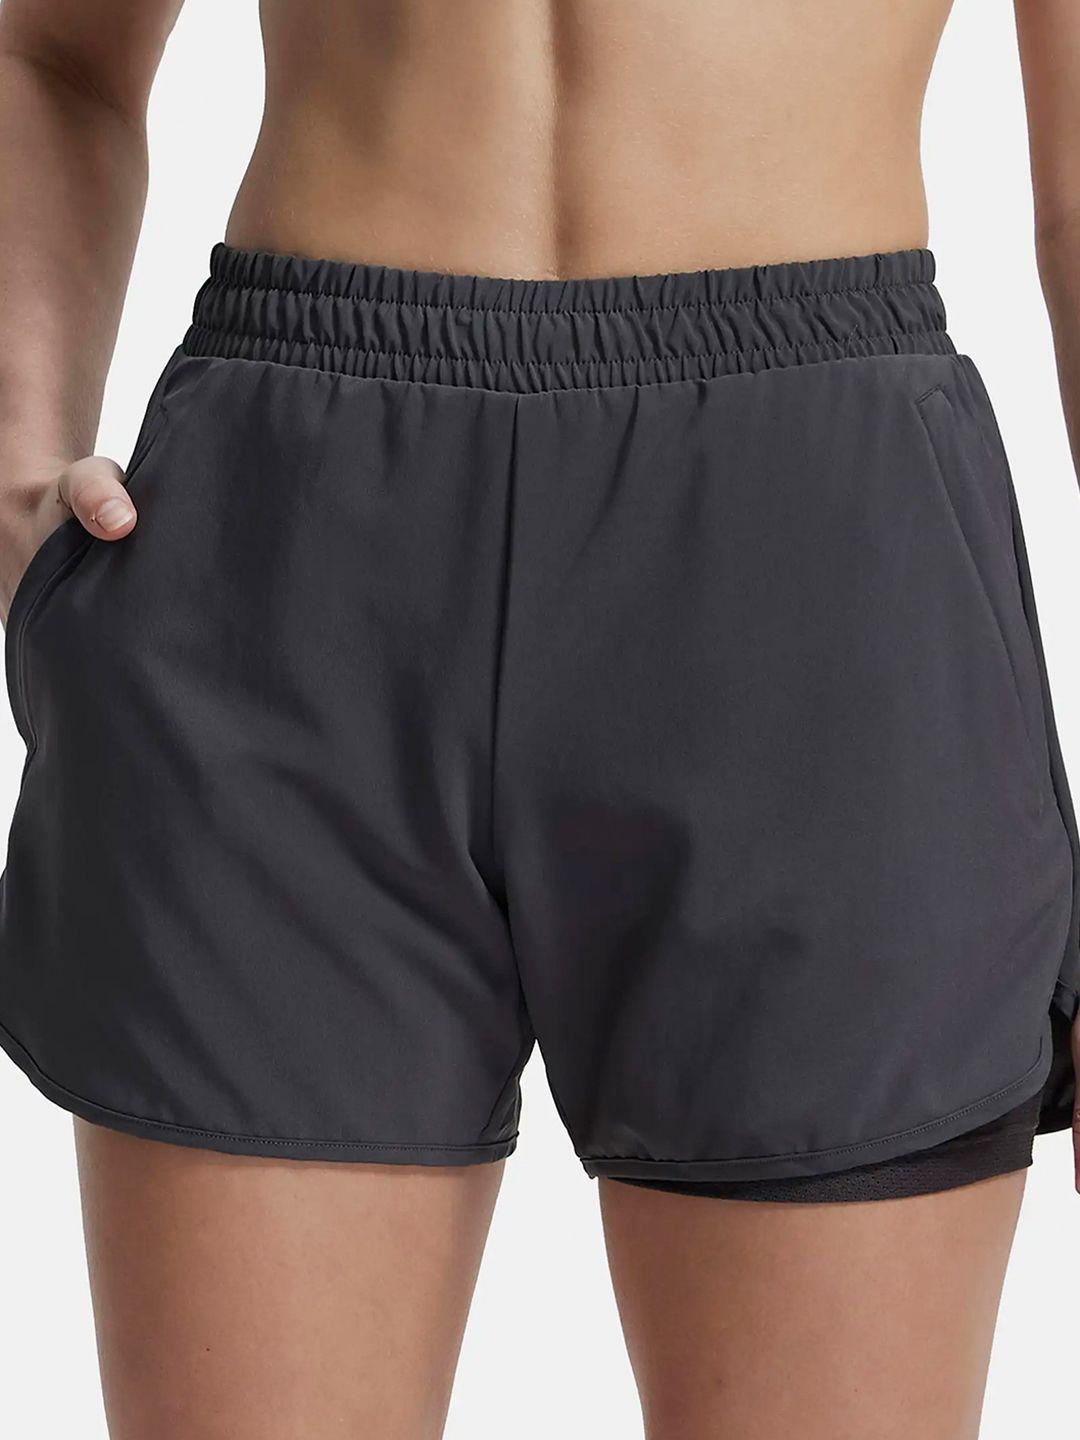 jockey women high-rise training or gym sports shorts with antimicrobial technology